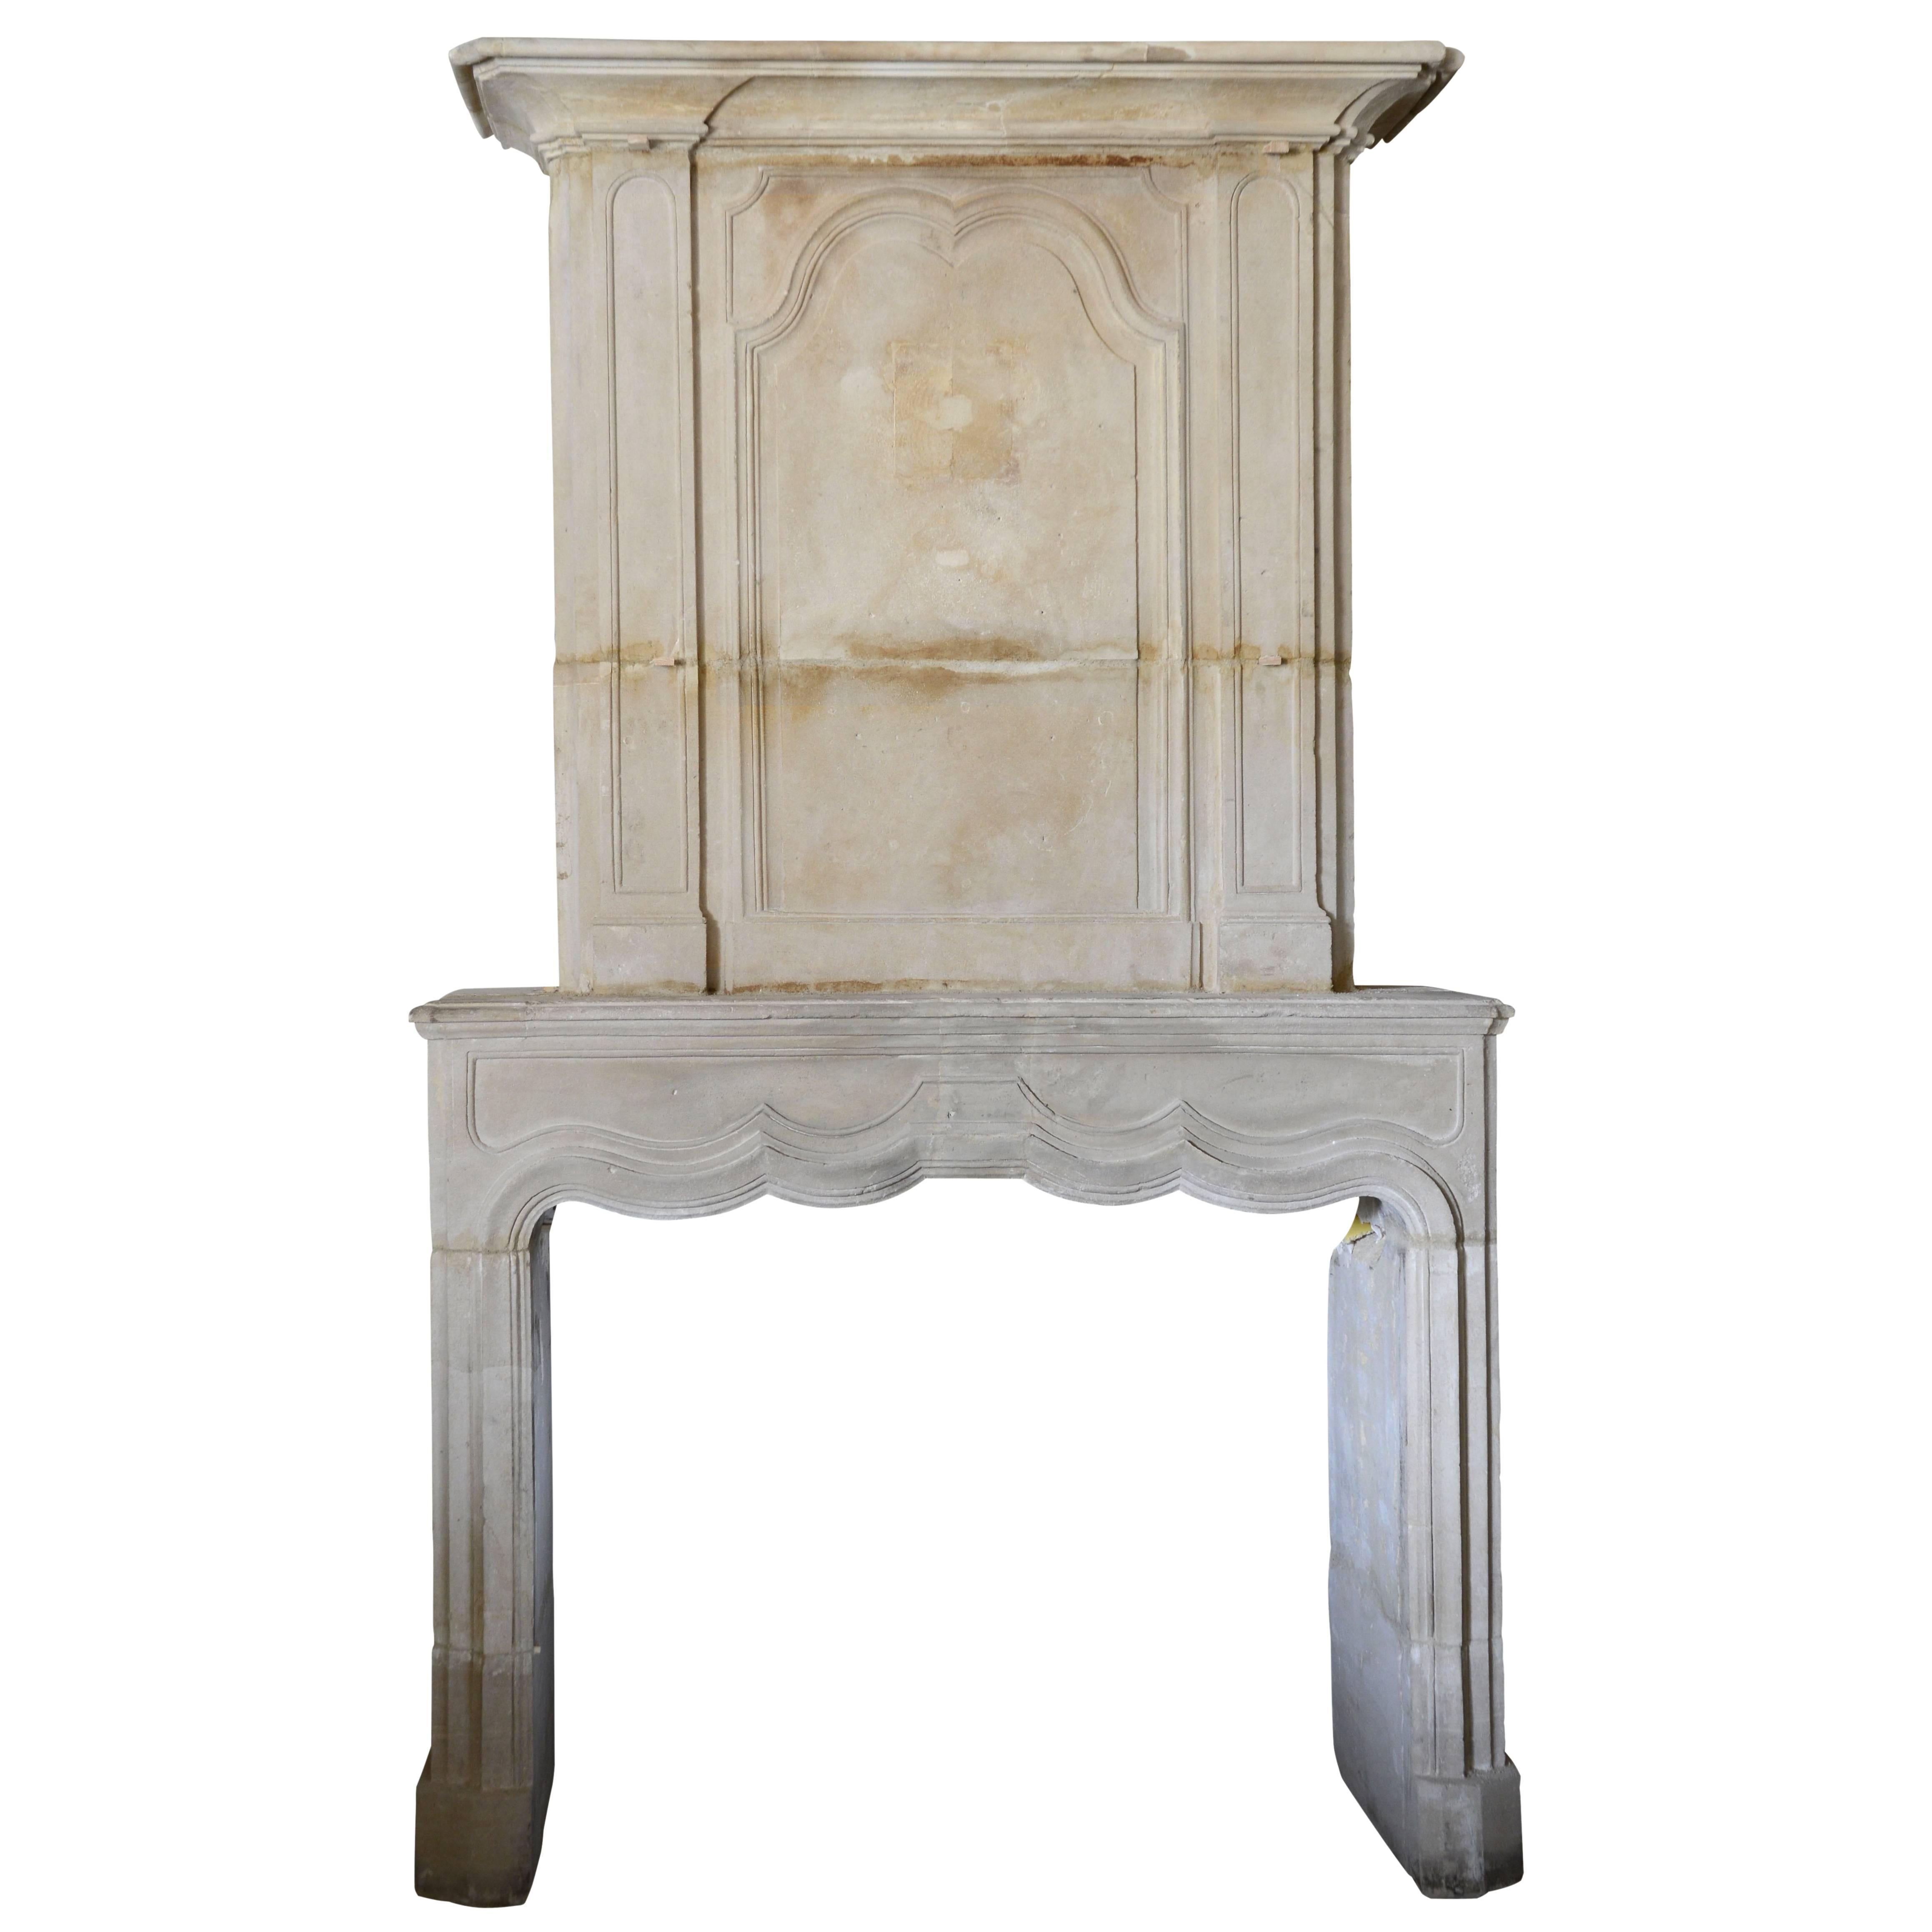 Louis XIV Period Burgundy Stone Fireplace, 18th Century For Sale